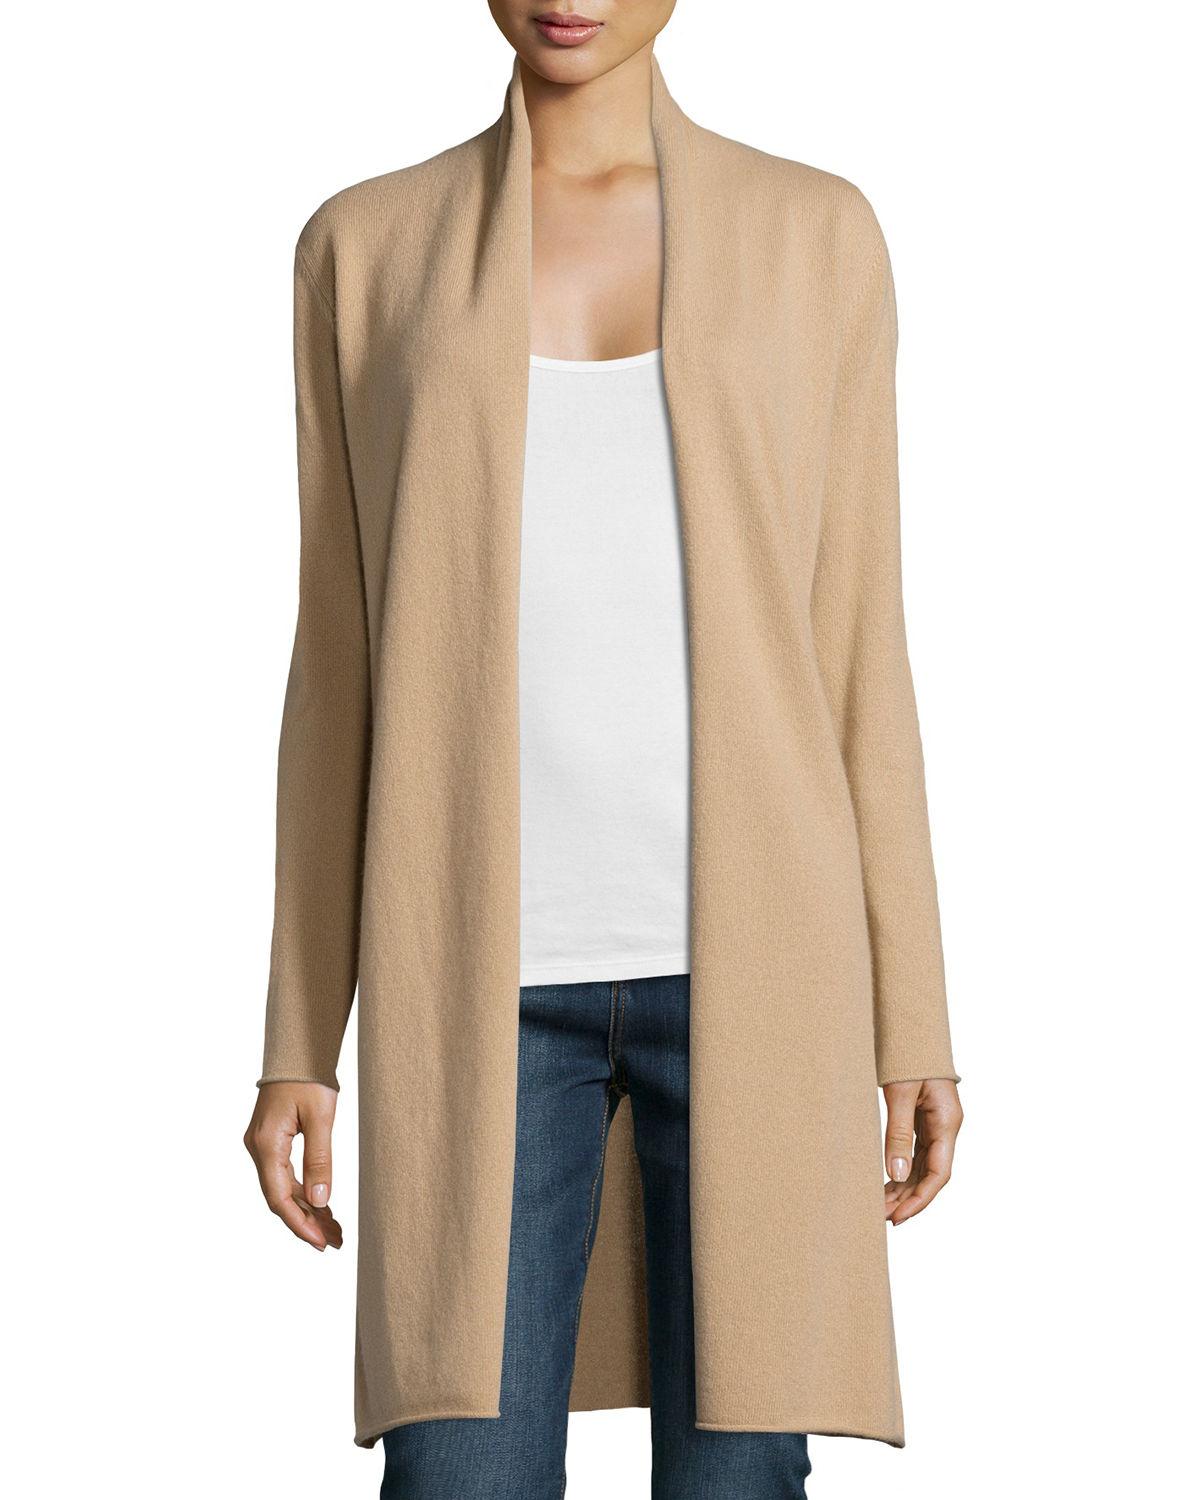 Neiman marcus Long Cashmere Duster Cardigan in Beige (CAMEL) | Lyst